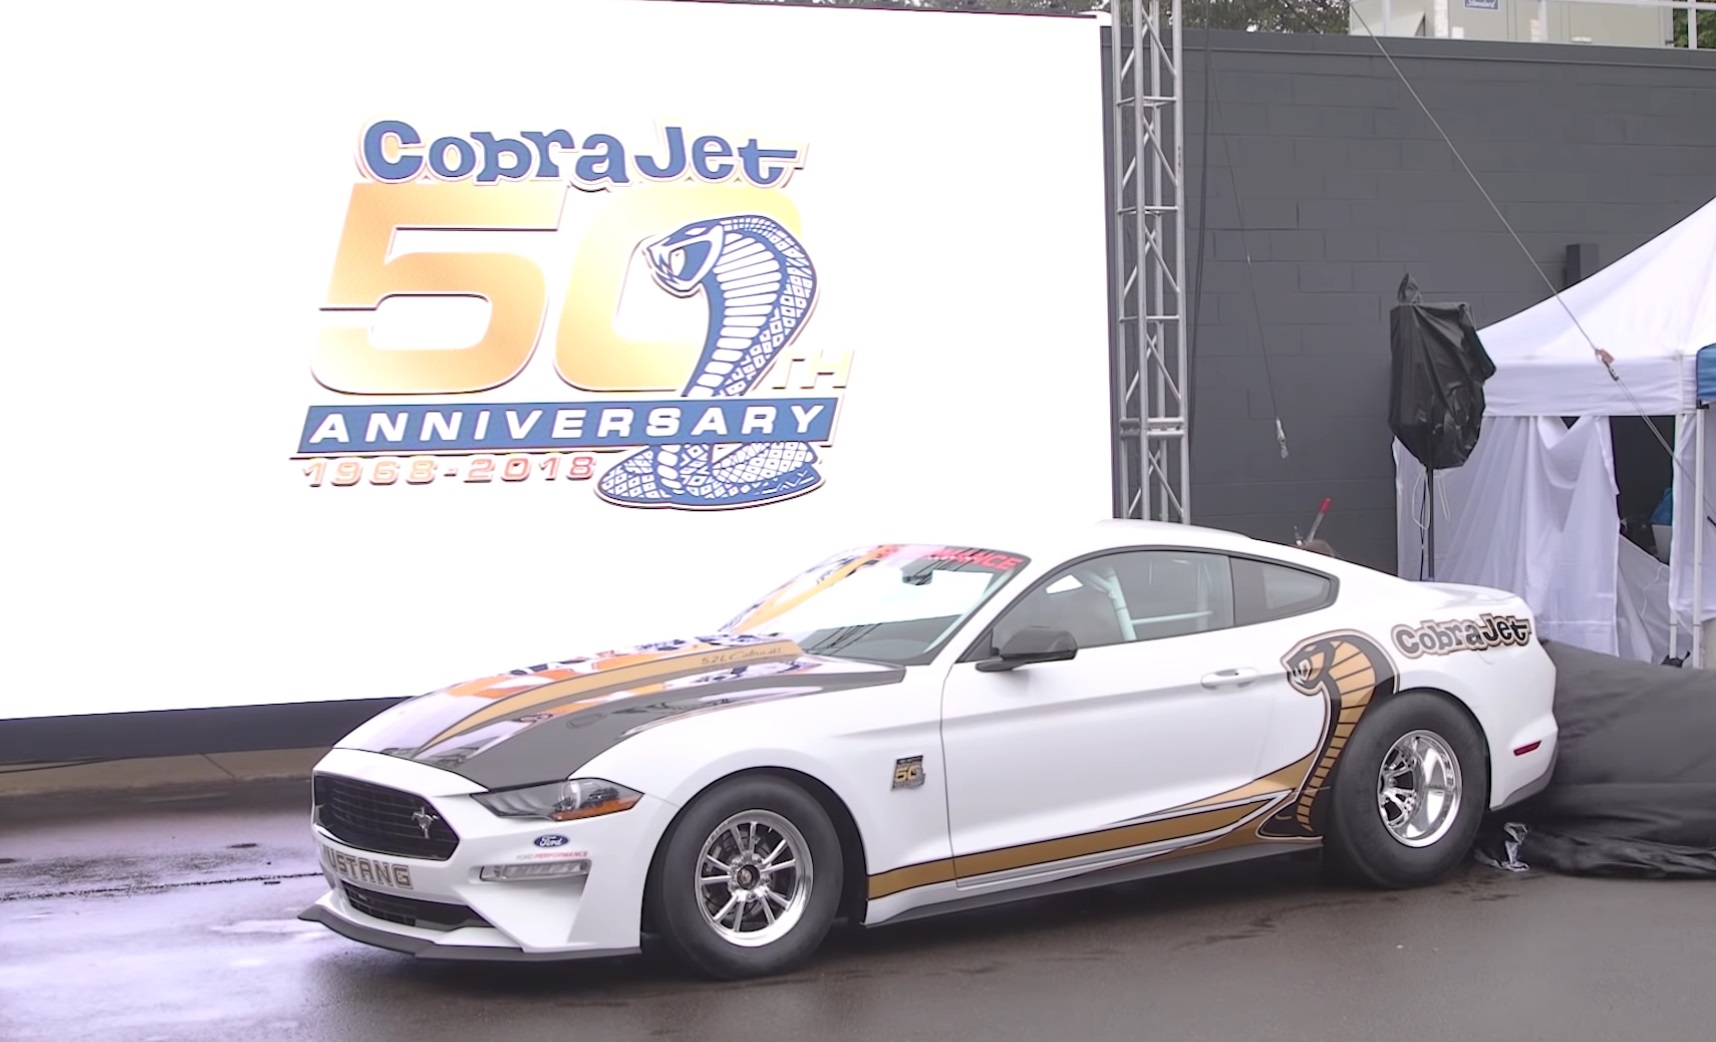 Video: 2018 Ford Mustang Cobra Jet Unveiling